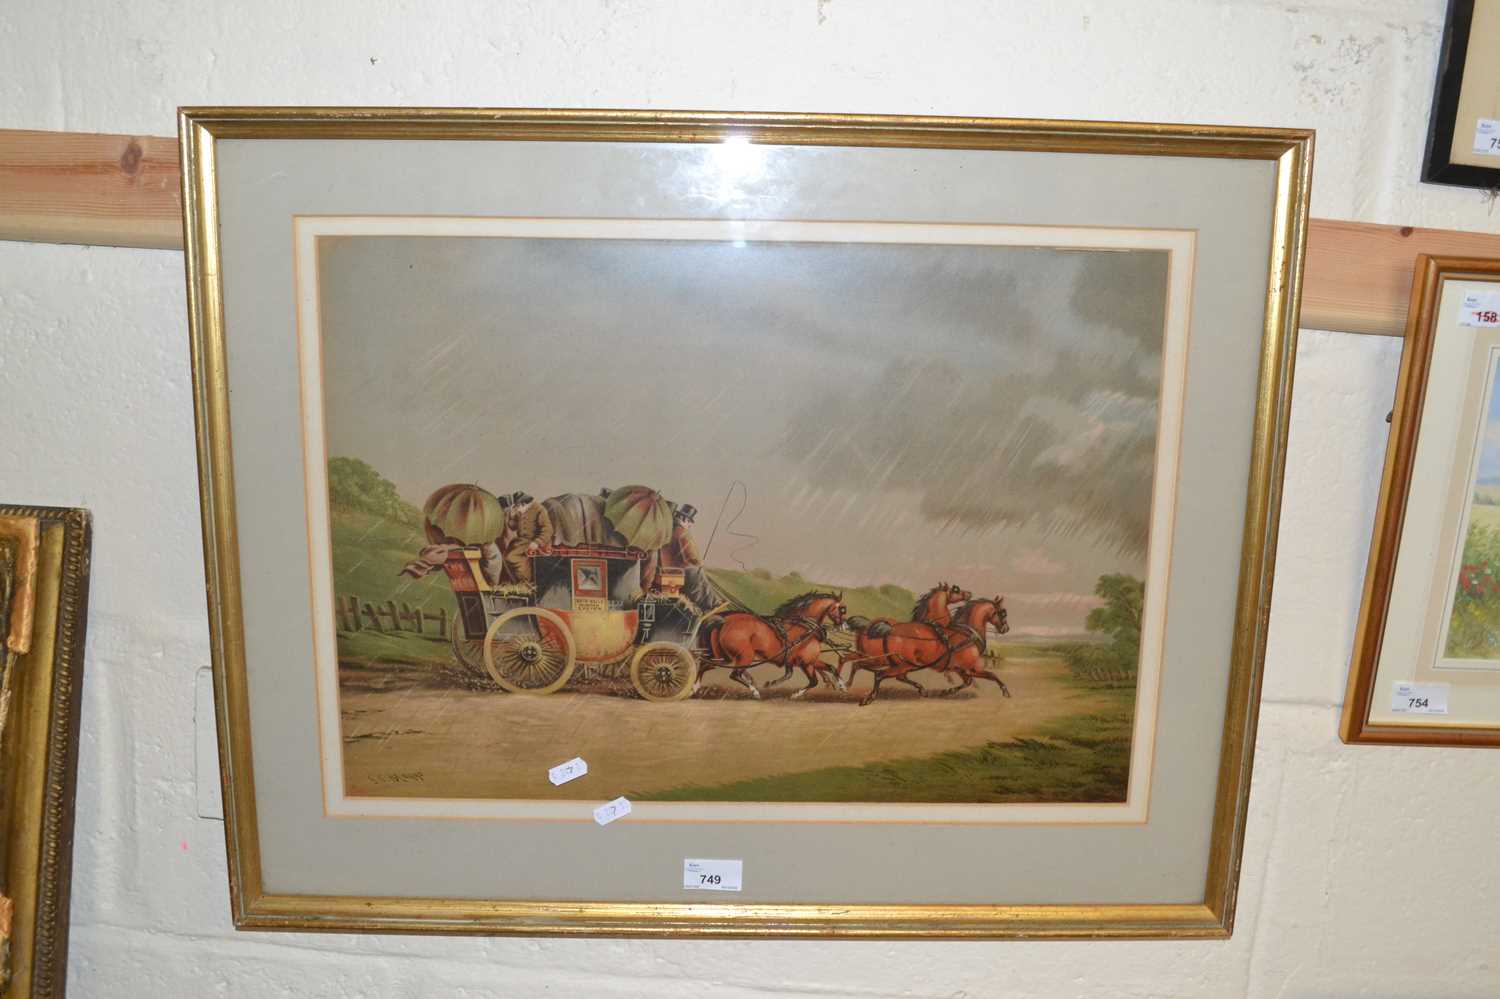 G C Maggs, study of The Bath, Wells, Taunton, Exeter Stage Coach, framed and glazed